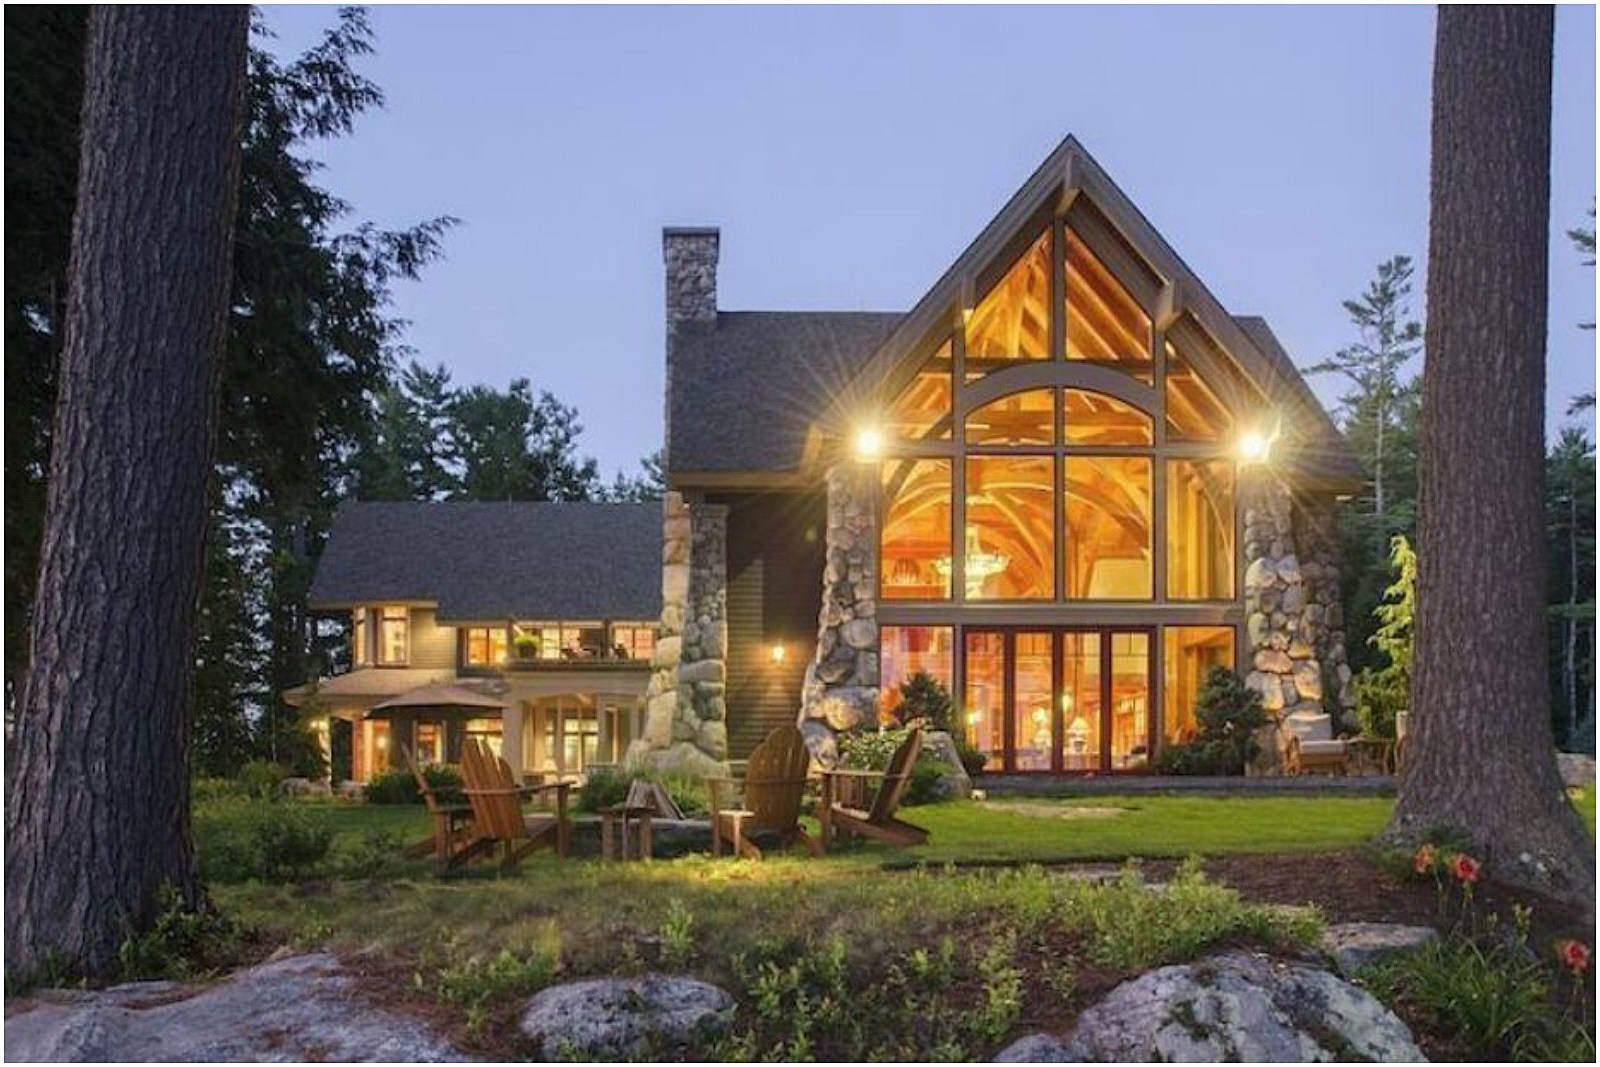 The New Most Expensive House for Sale in Maine Is on Sebago Lake